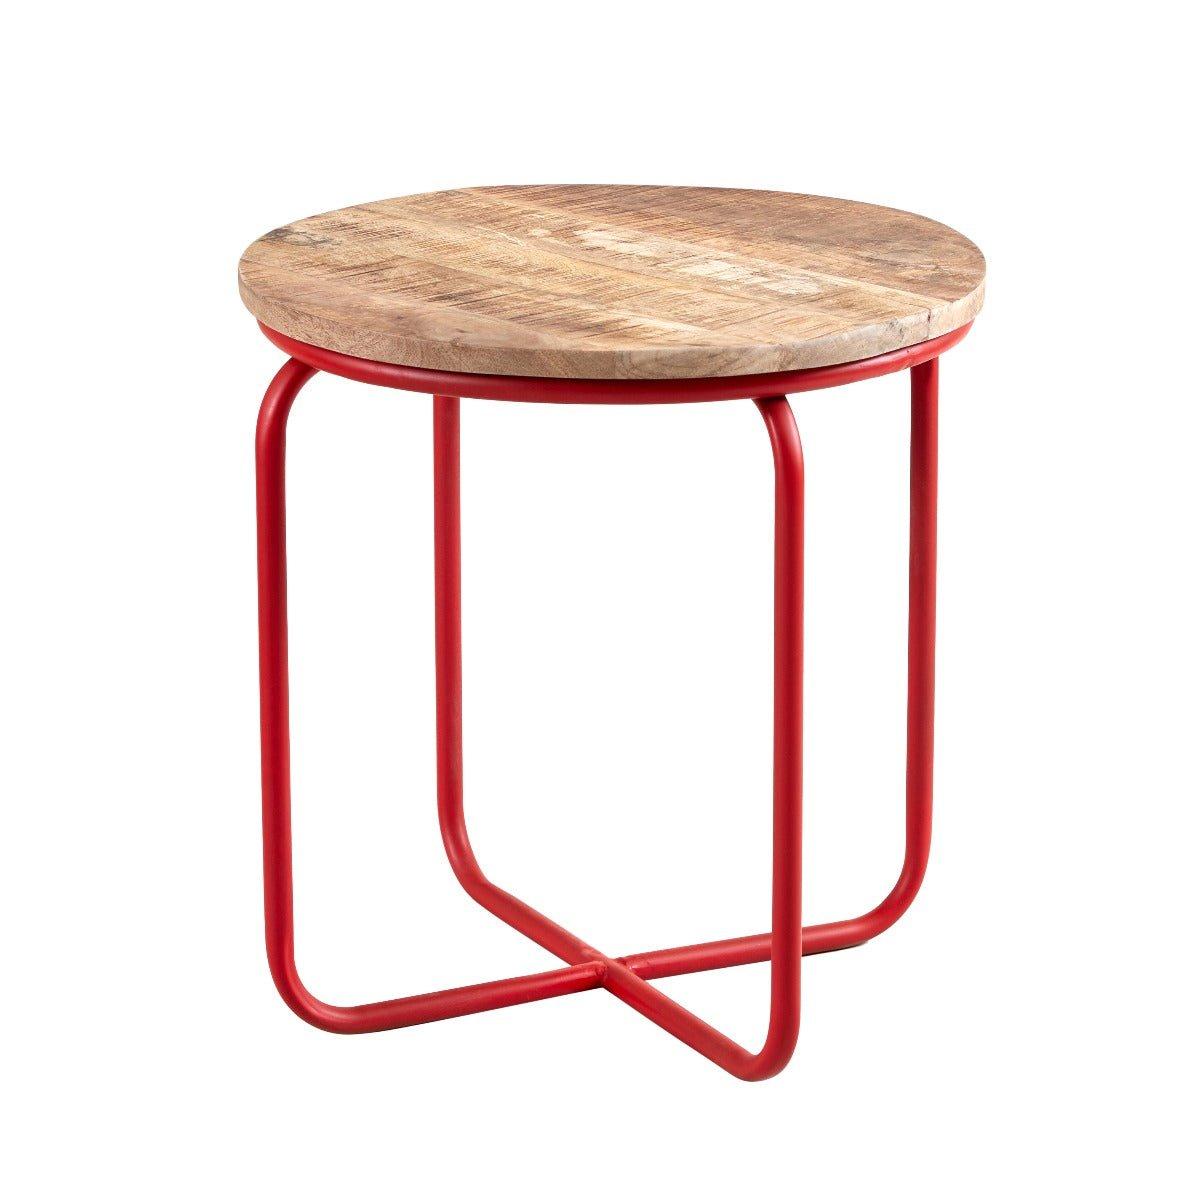 Rische Round Bar Stool made from Reclaimed Metal and Solid Wood